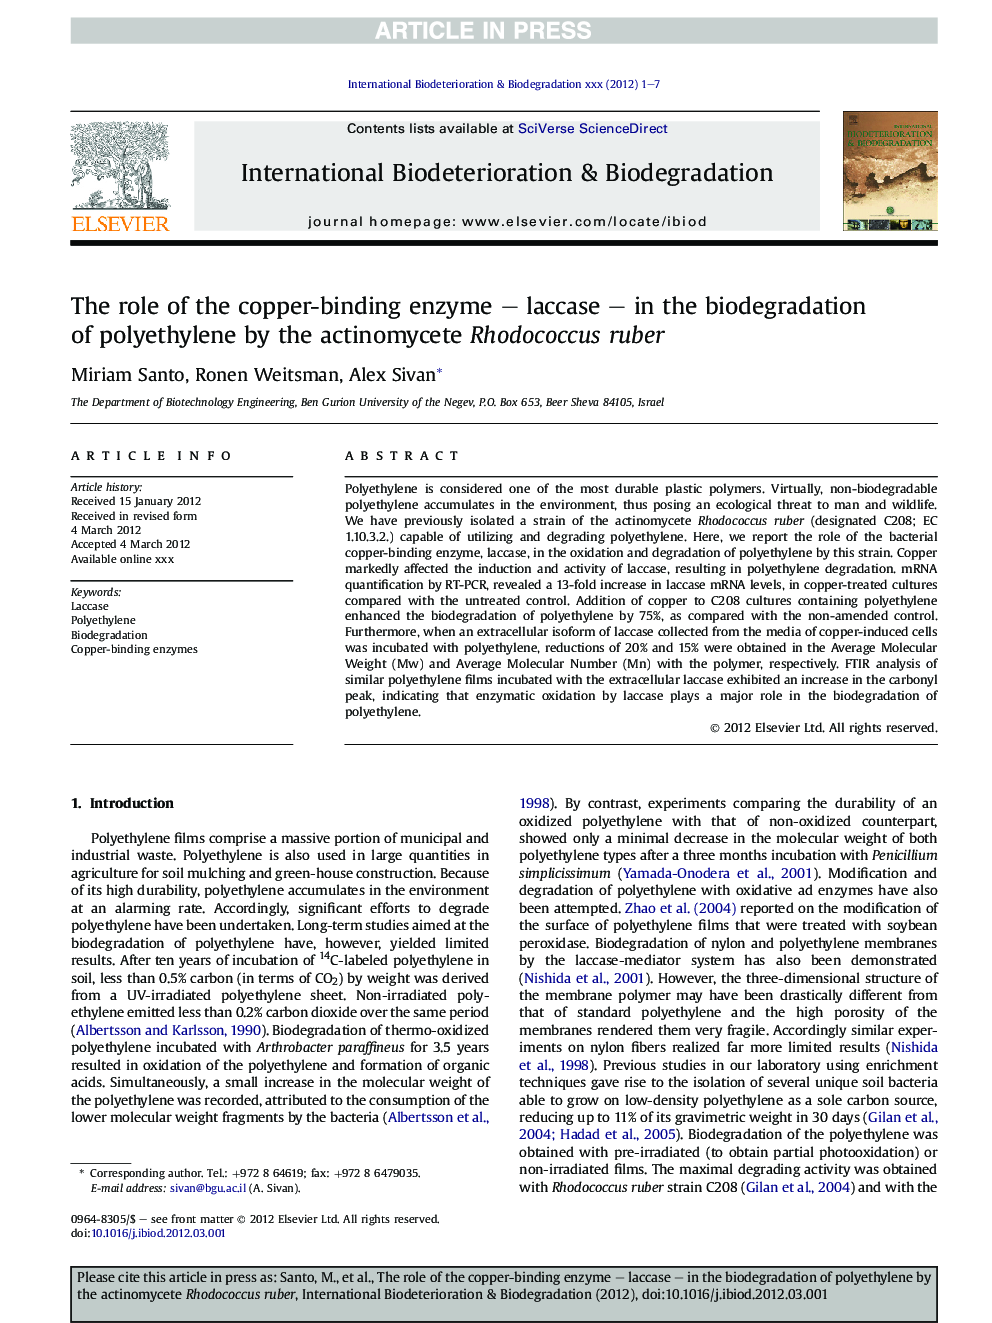 The role of the copper-binding enzyme - laccase - in the biodegradation of polyethylene by the actinomycete Rhodococcus ruber